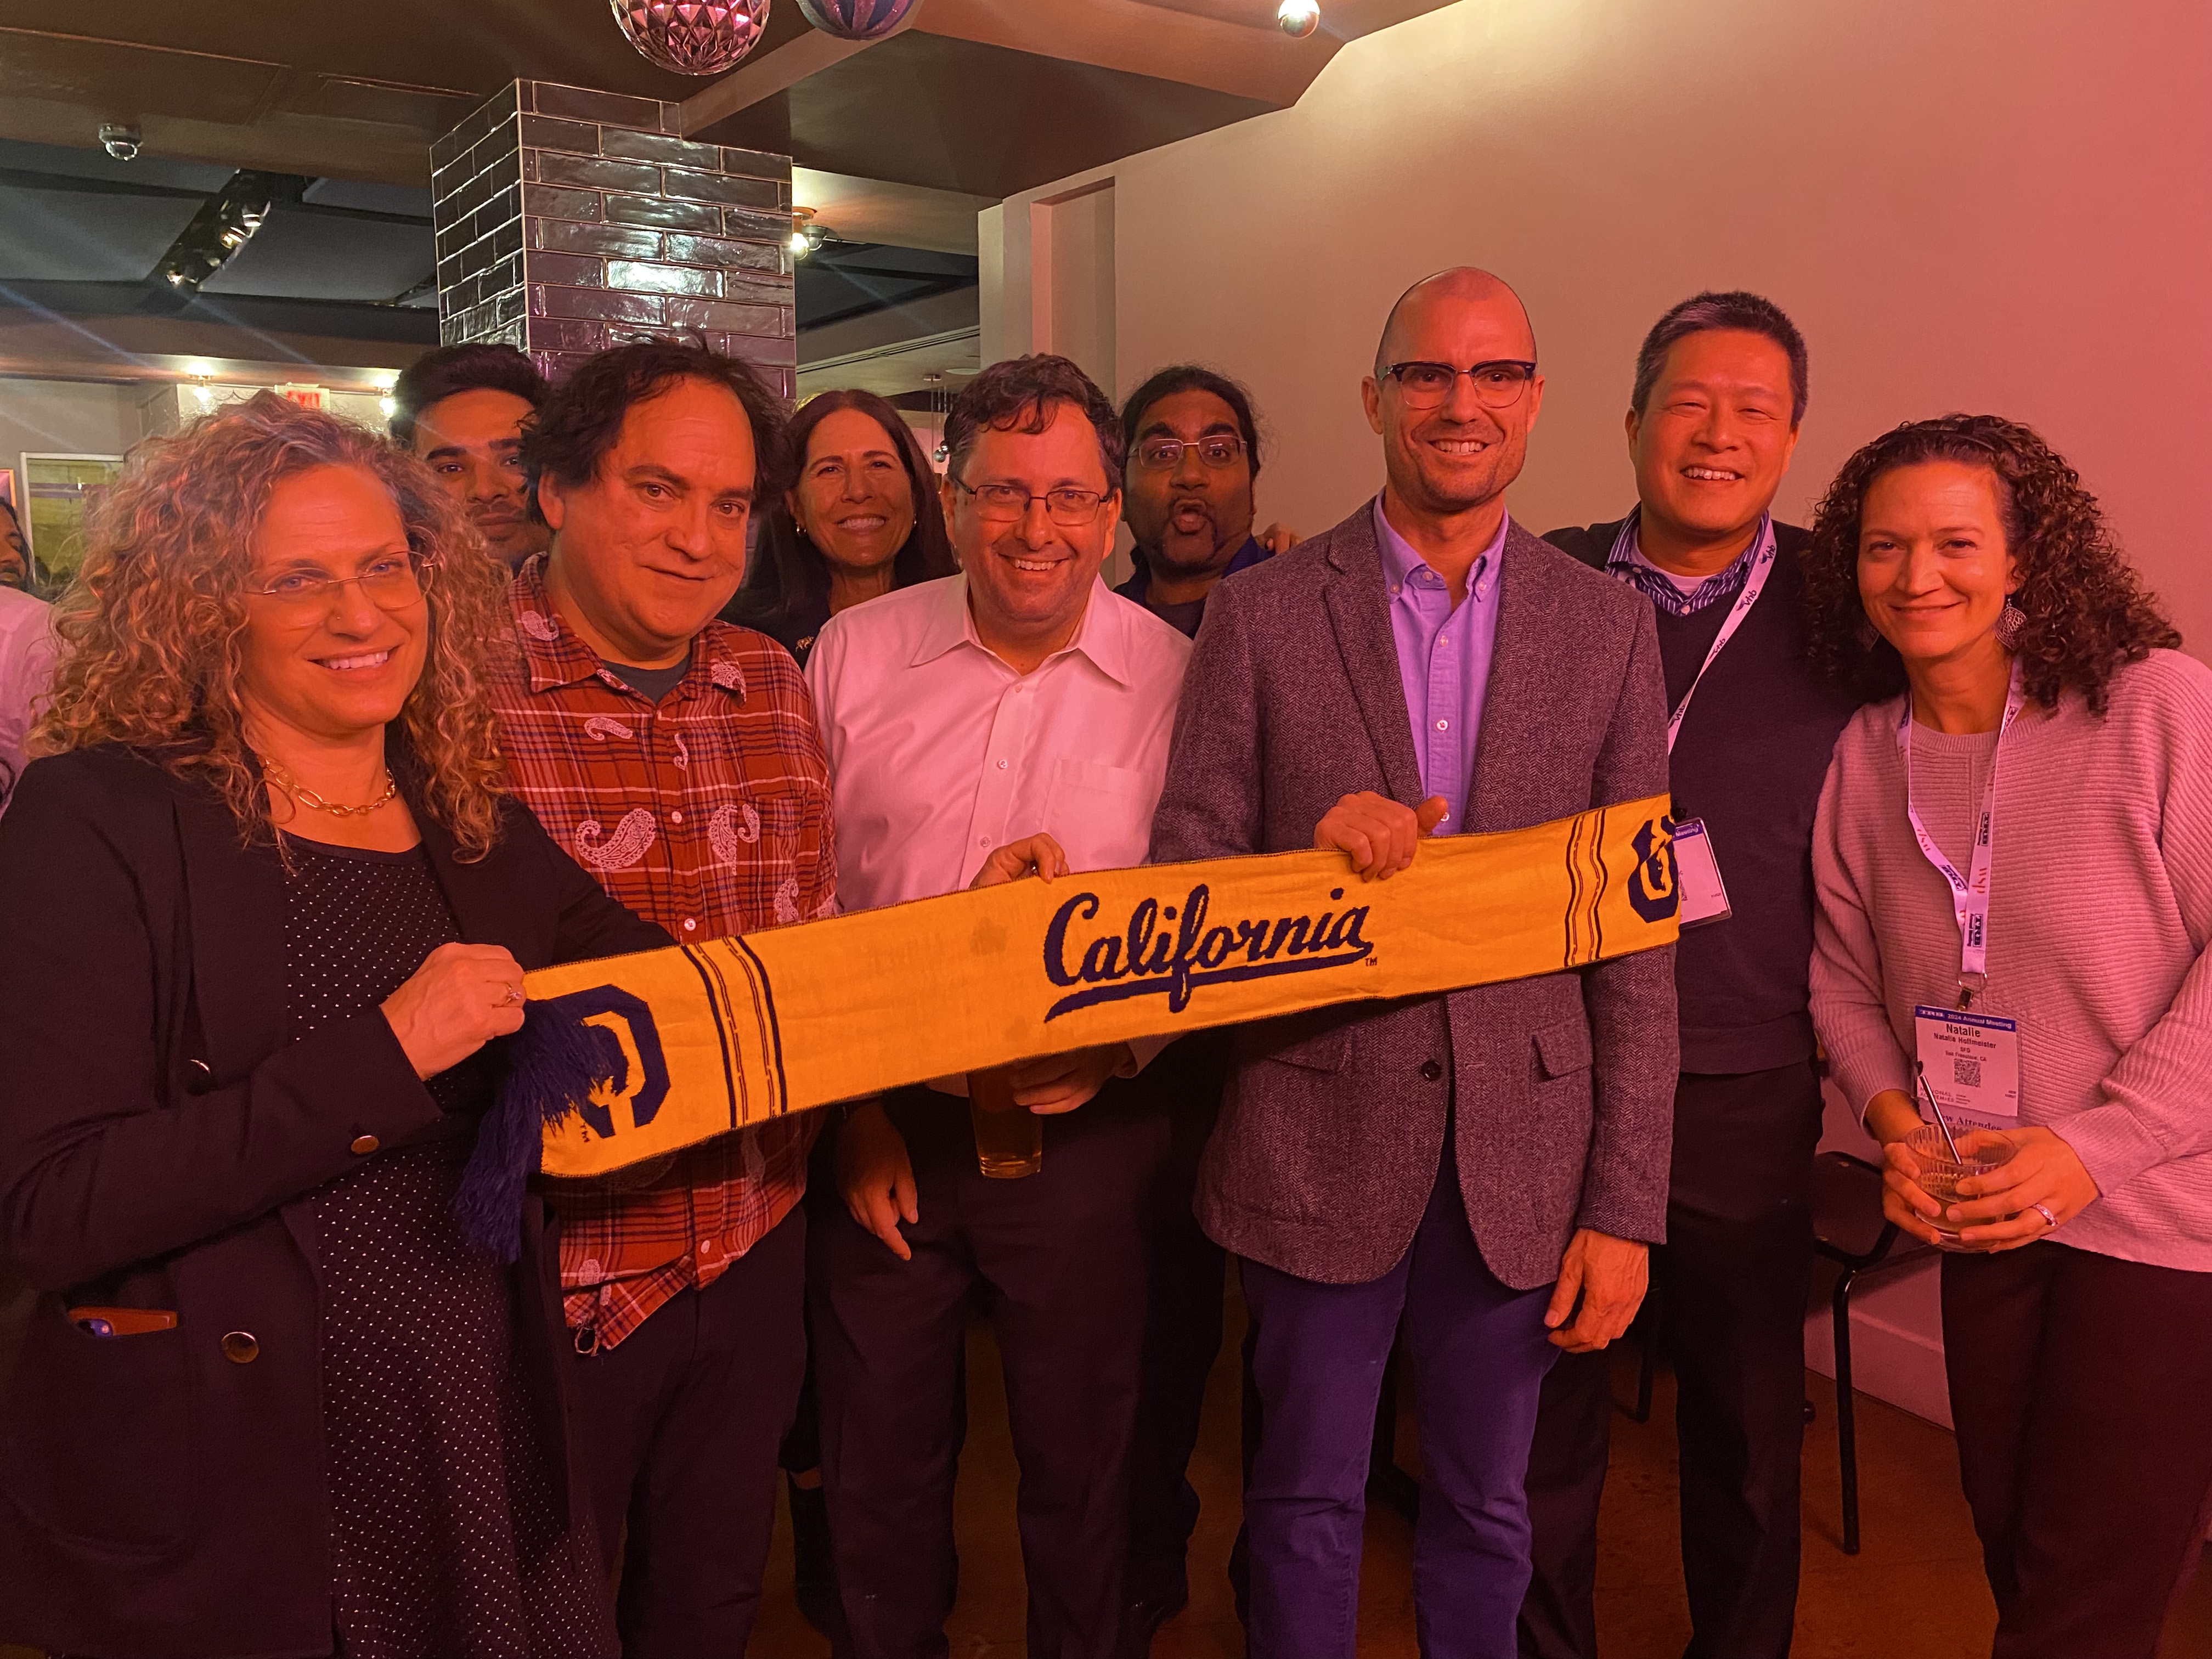 ITS Berkeley held a reception for Washington DC Cal alum, a group holds a Cal scarf